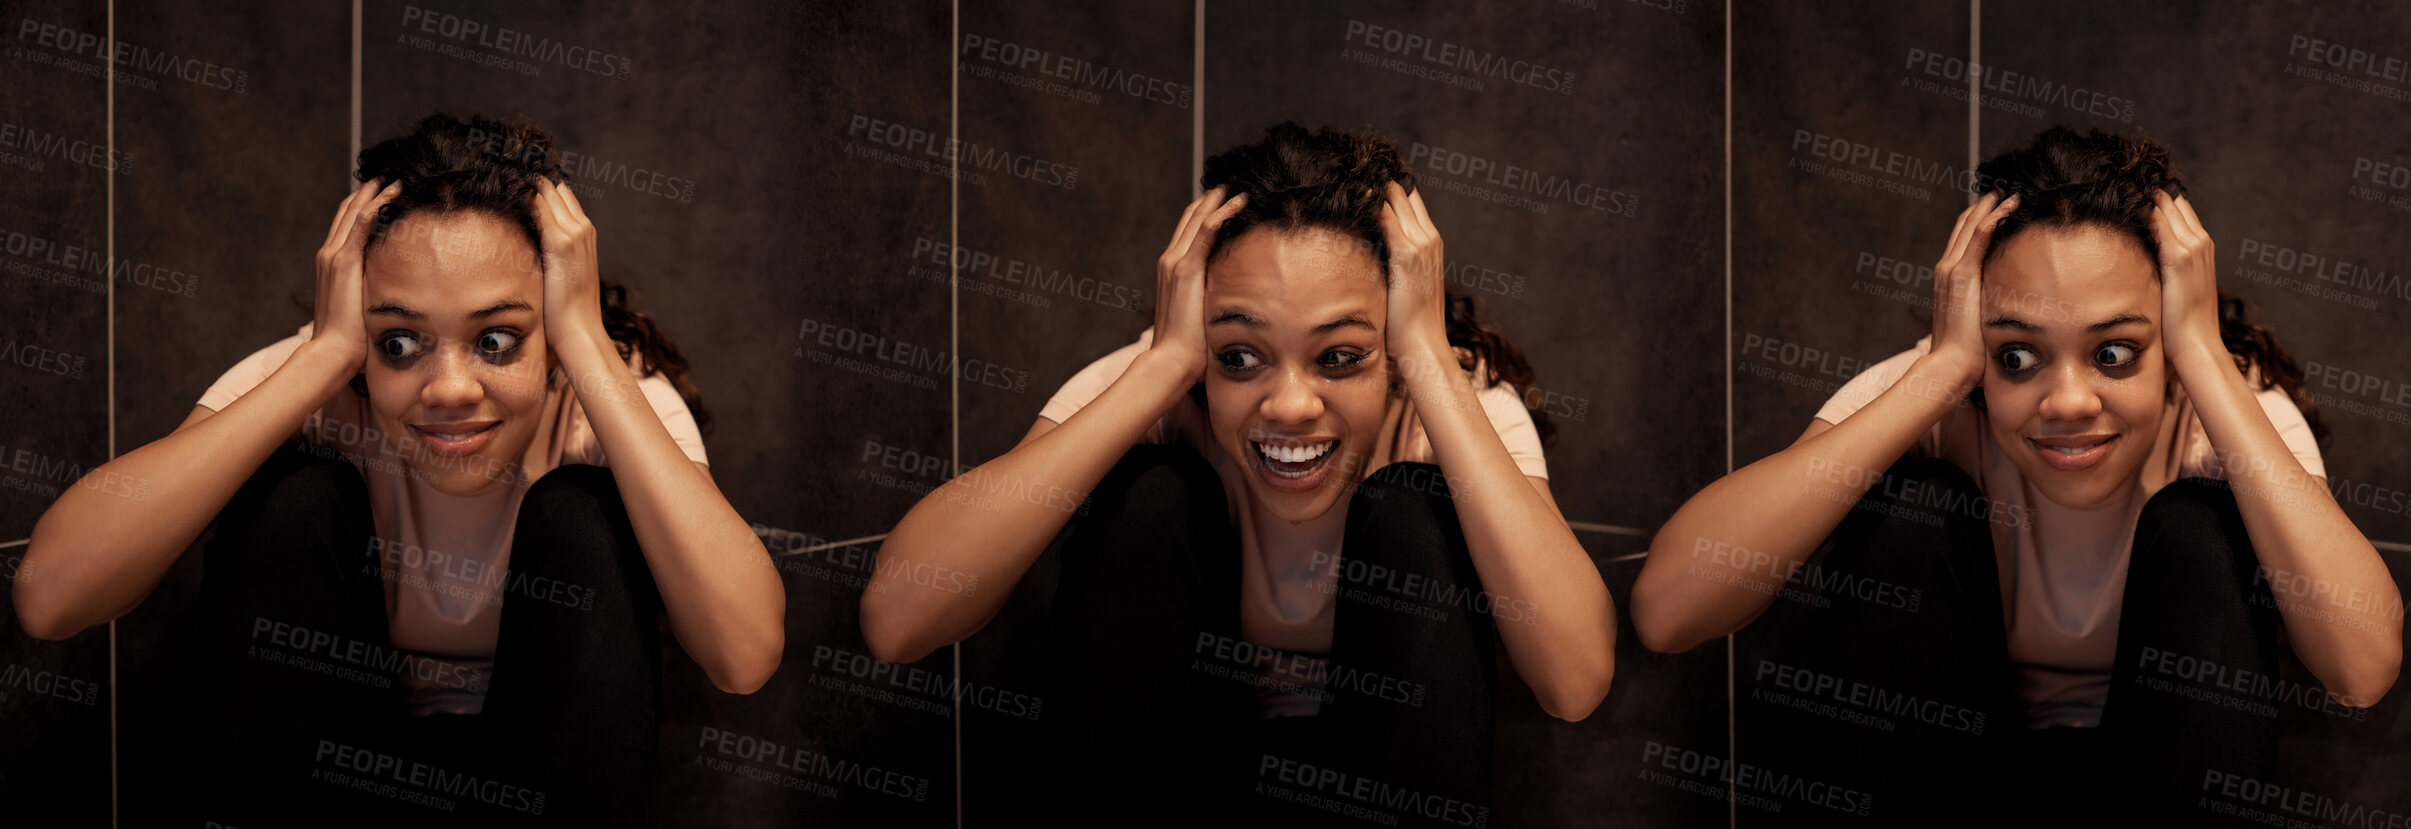 Buy stock photo Shot of a young female having a mental breakdown at home